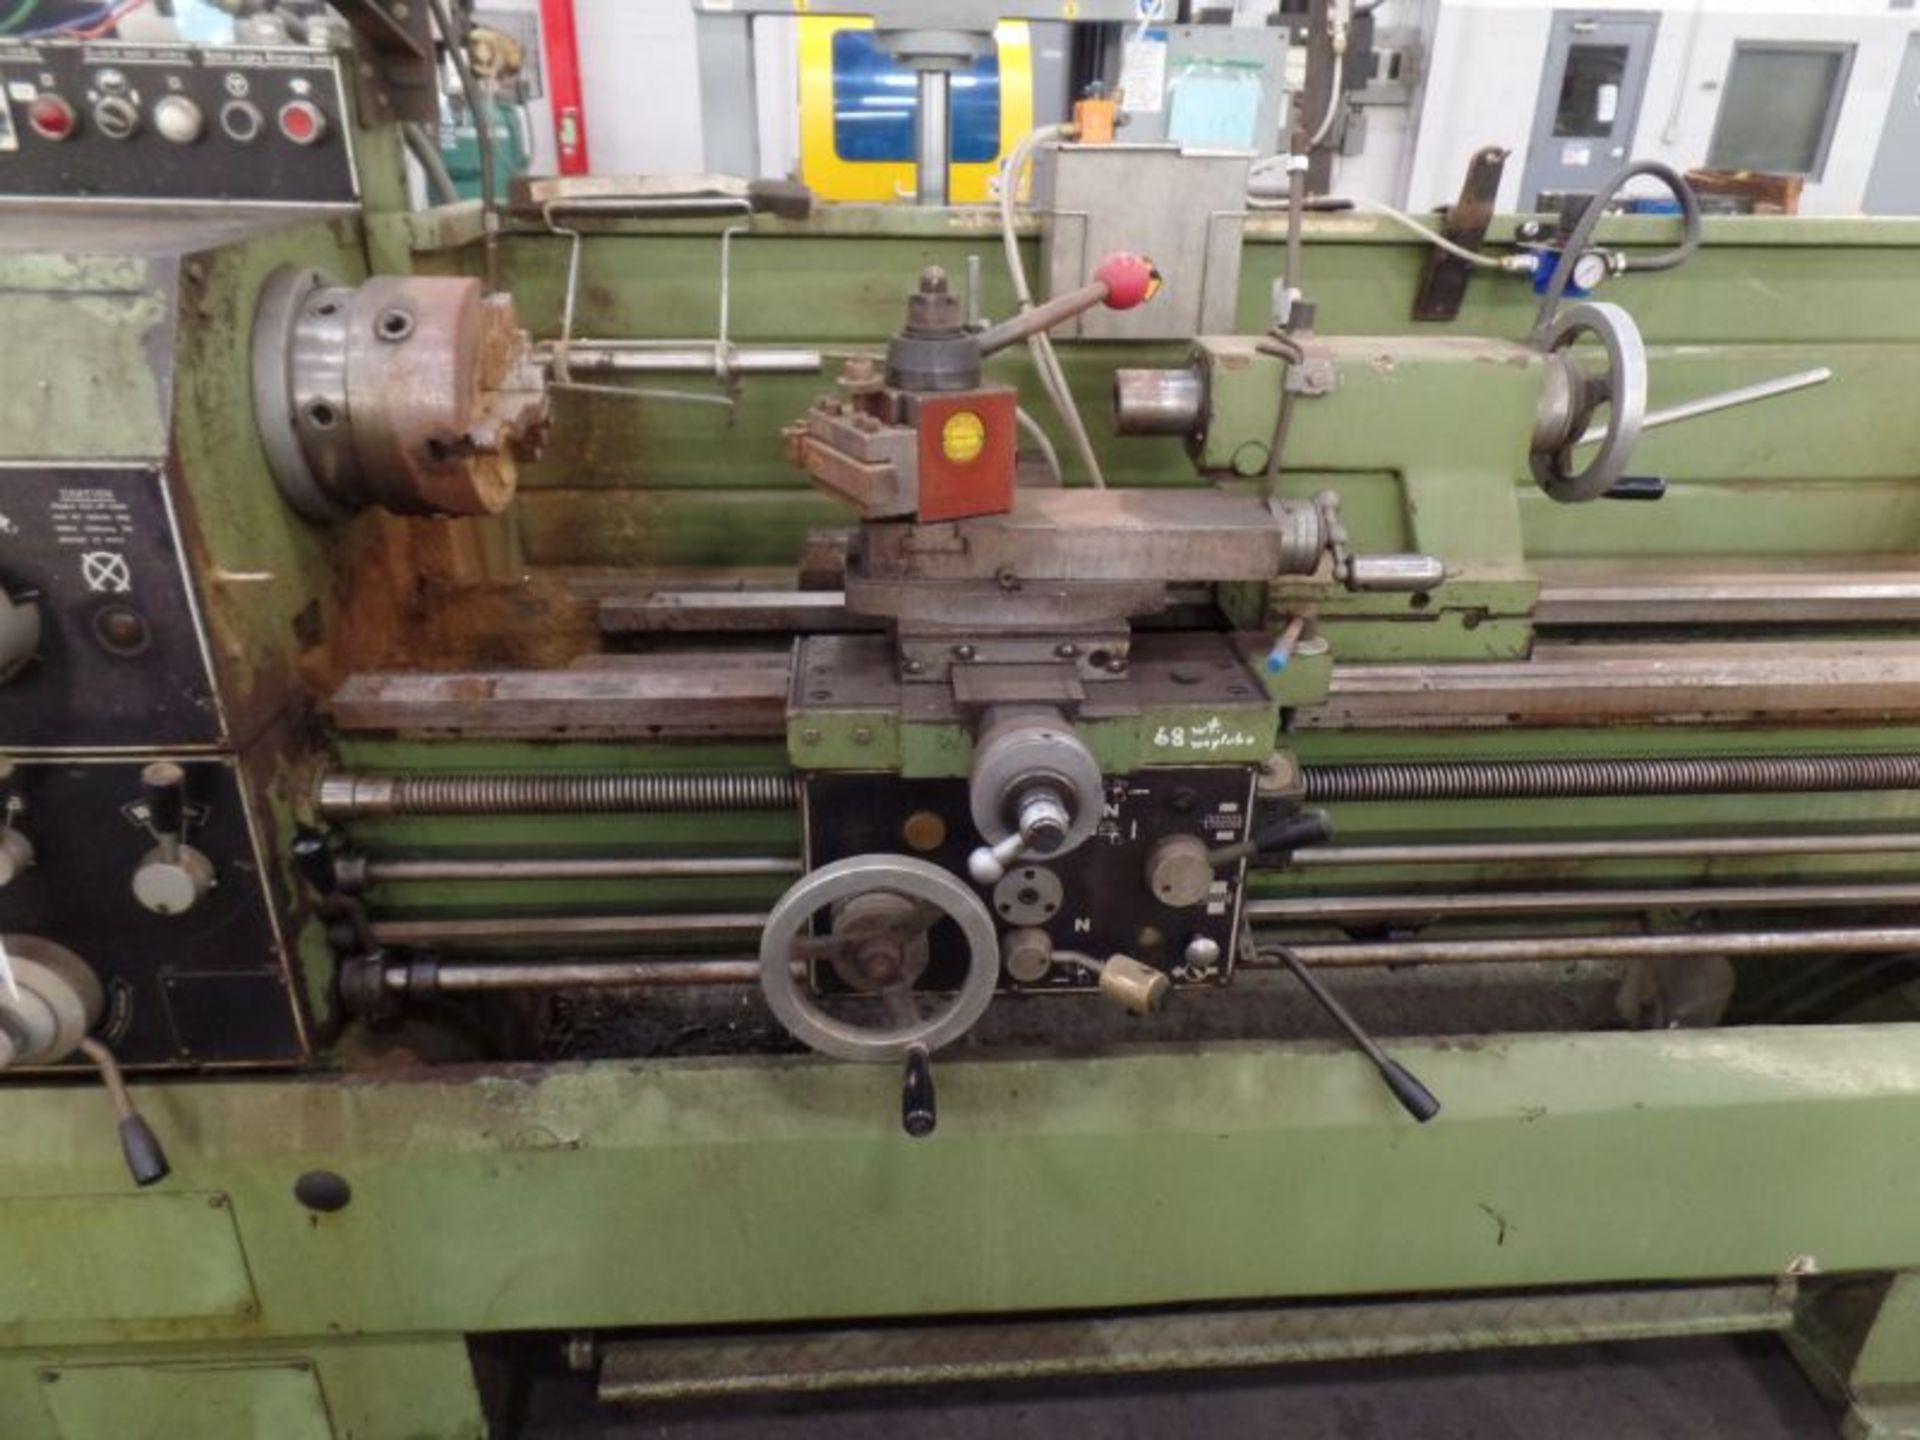 Enco 1111760 Manual Lathe, 8" Chuck, 56" Between Centers, s/n 104 - Image 9 of 10